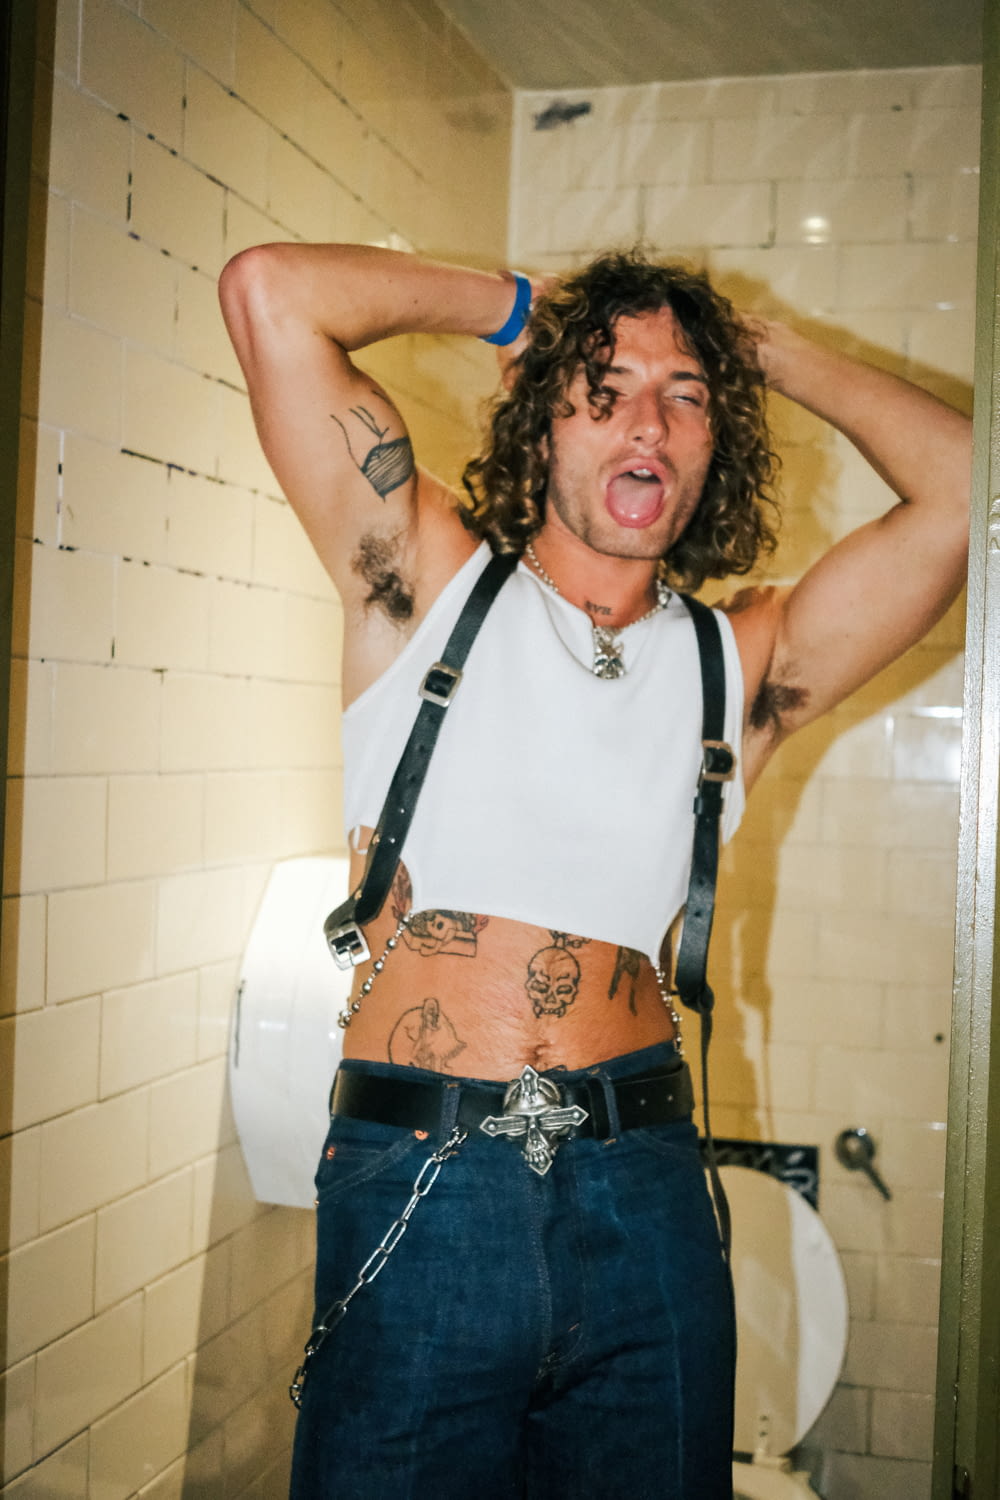 a man with long hair wearing suspenders in a bathroom